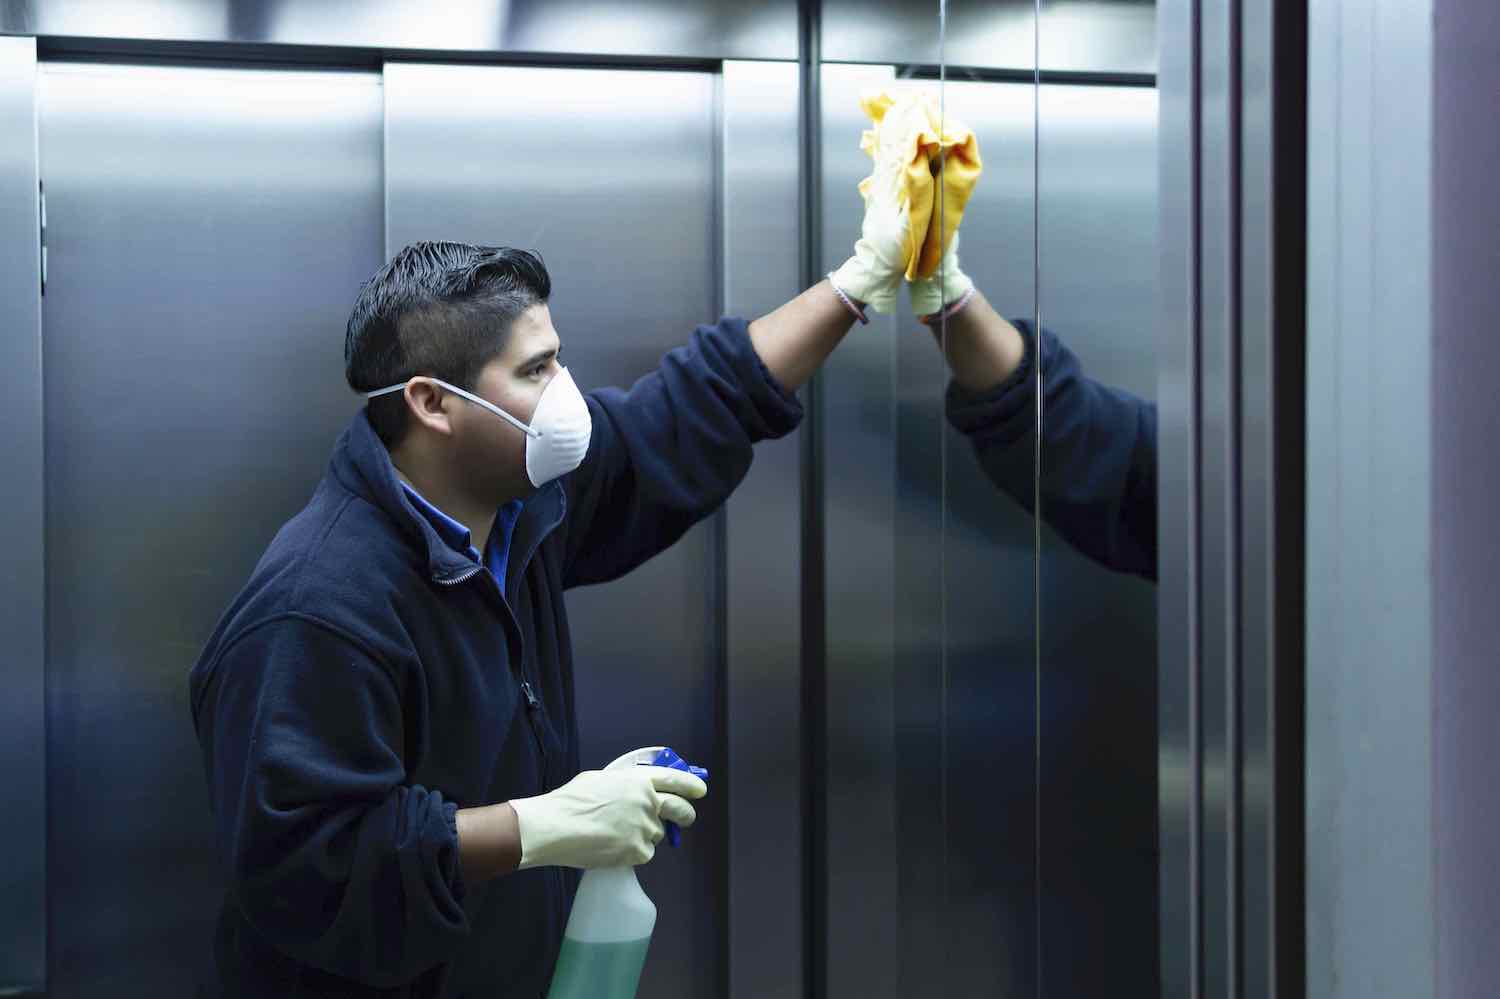 A man cleans an elevator at a senior living facility.